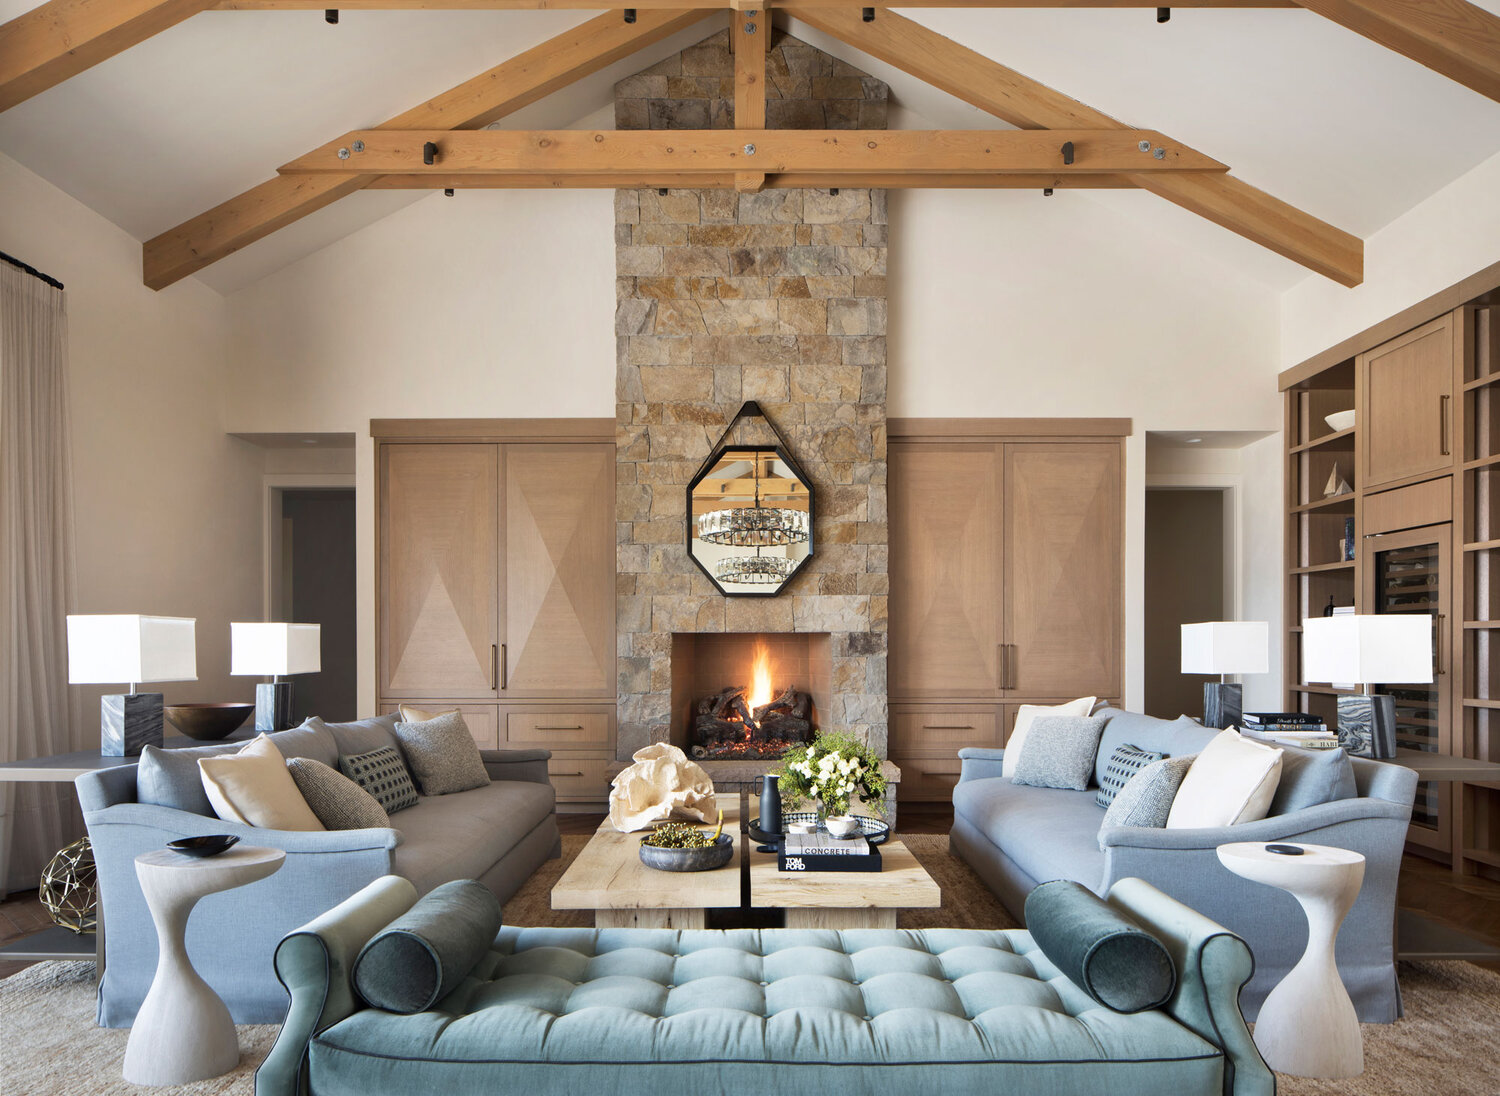 Formal living room with open beam ceiling and stone fireplace.